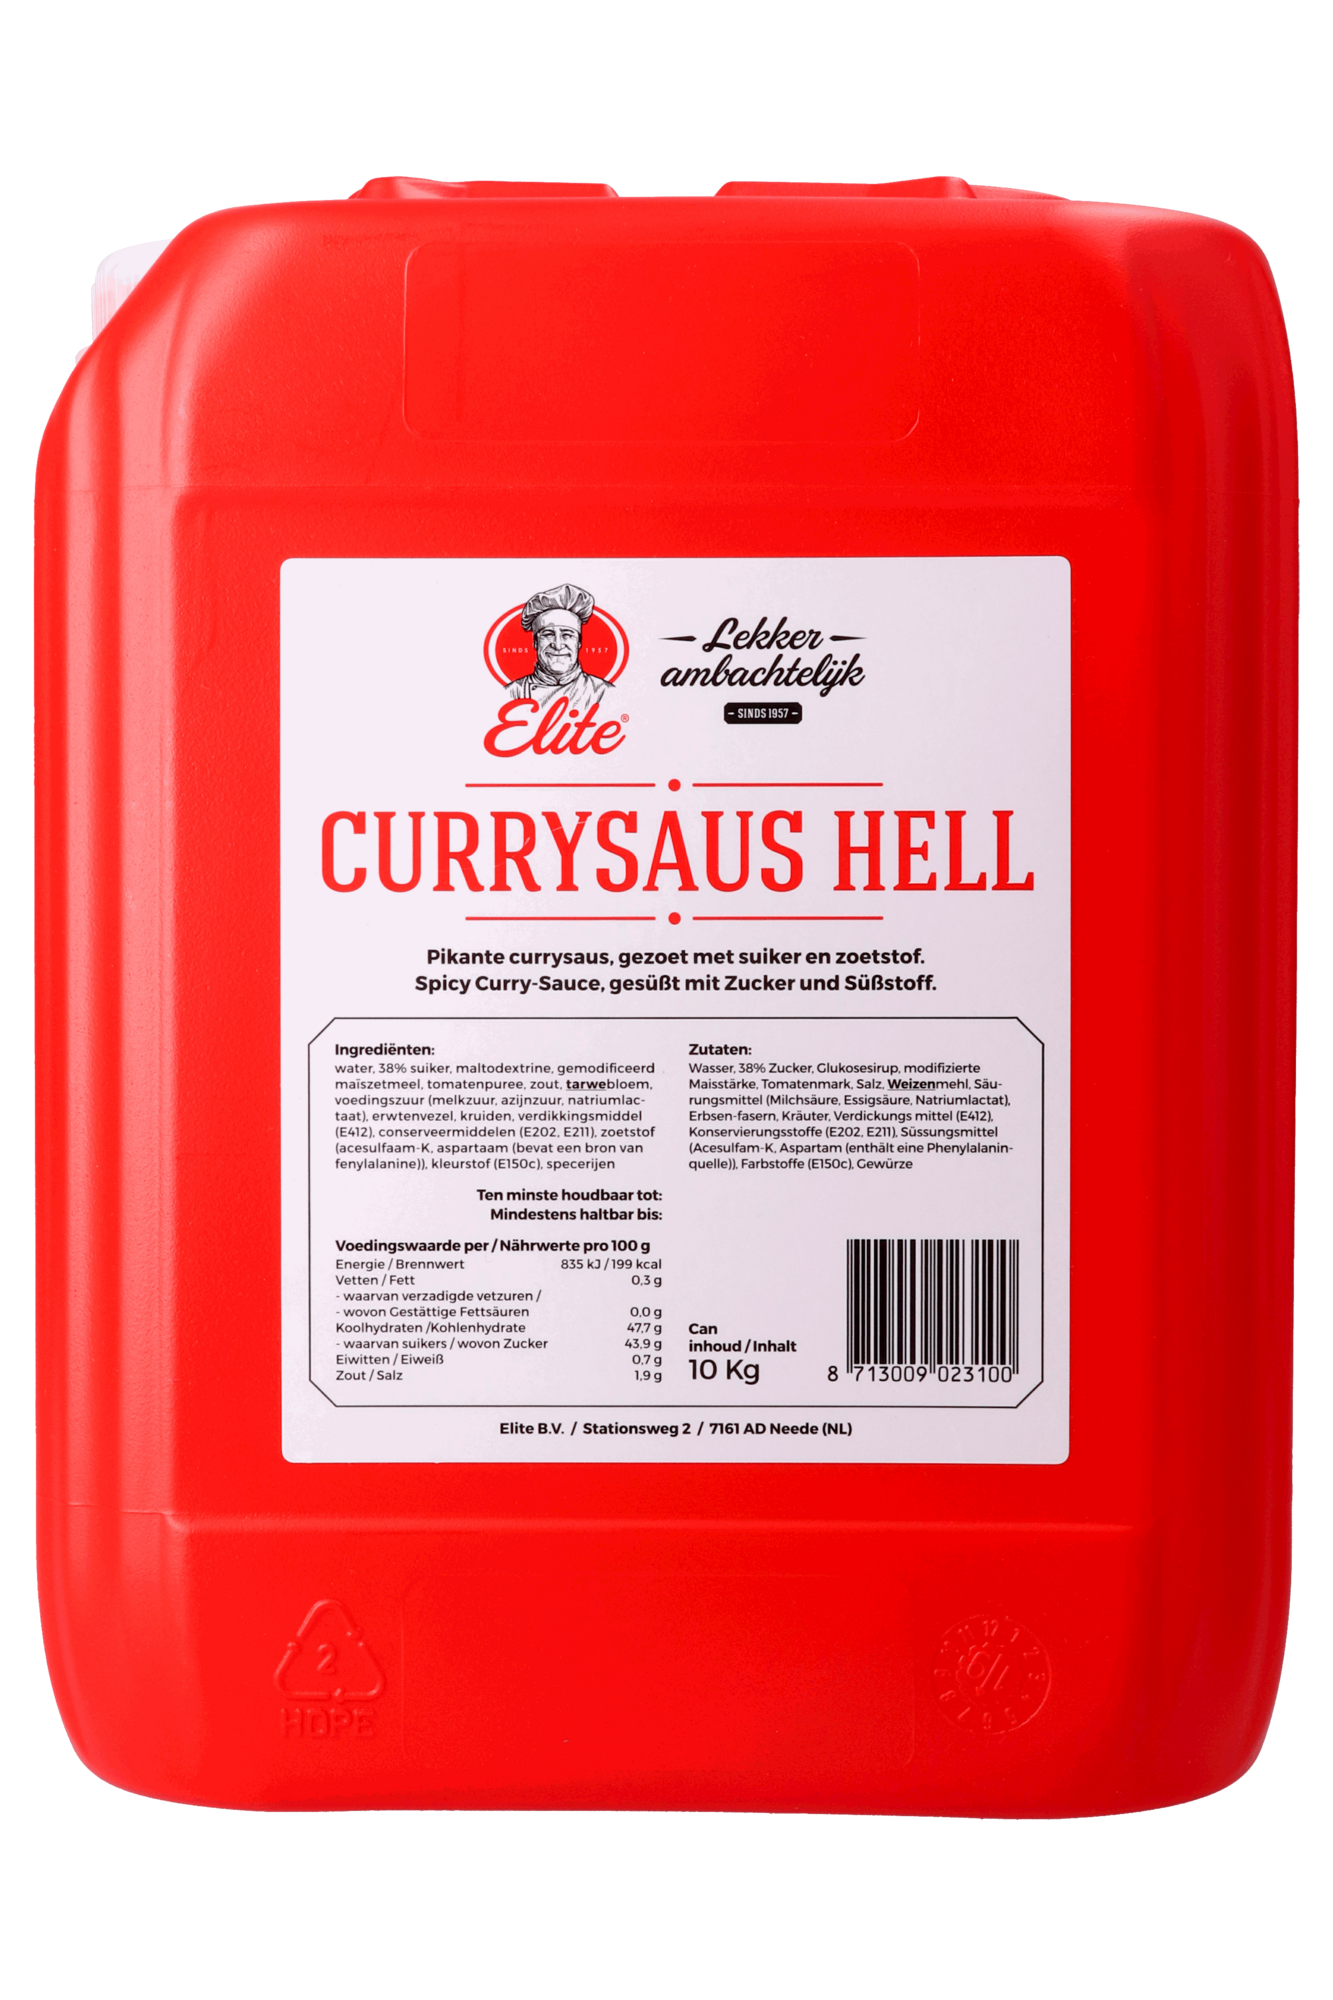 55986 Currysaus hell can 1x10 kg